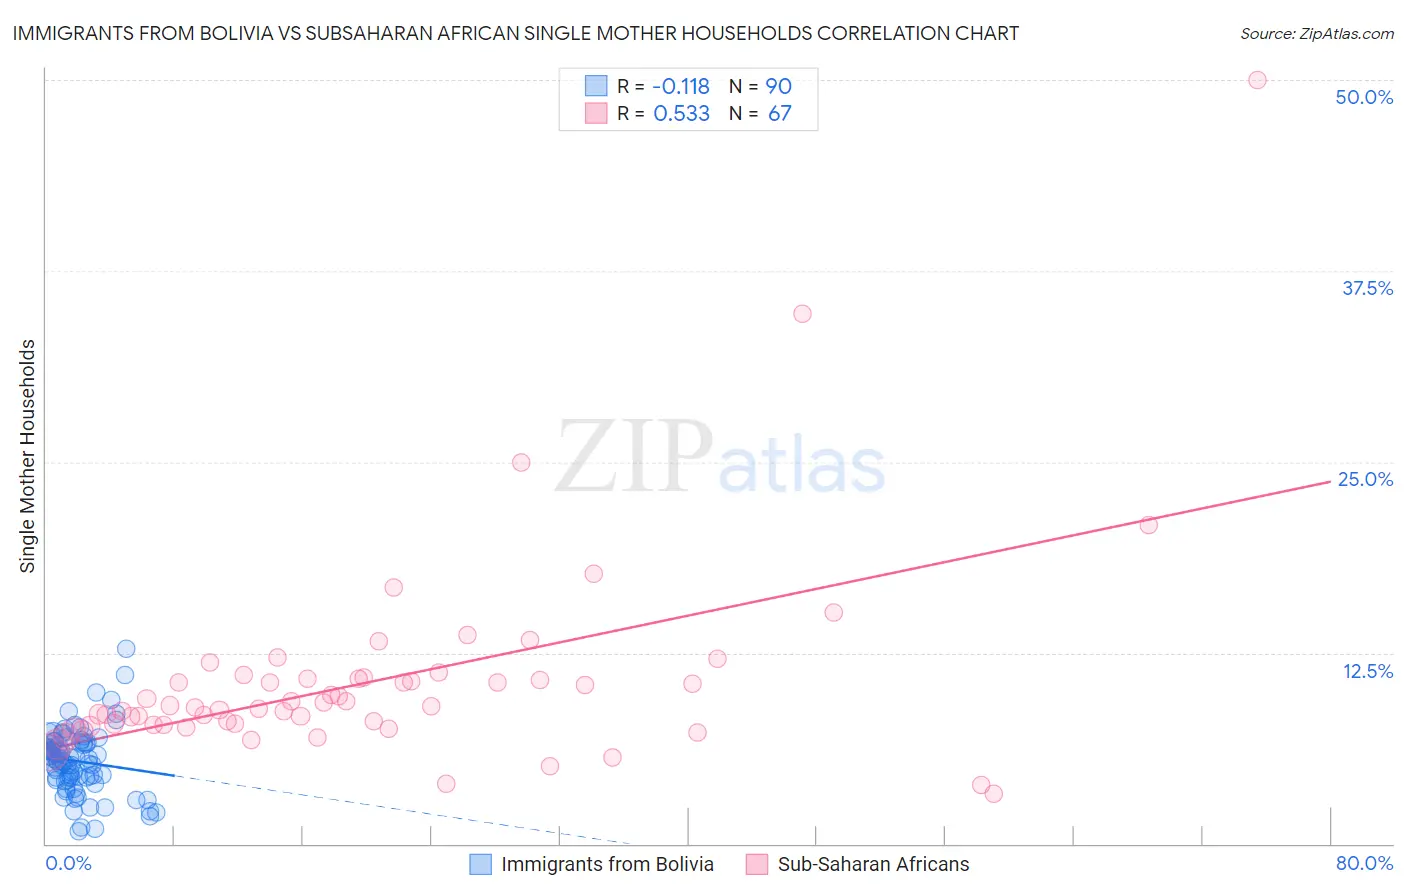 Immigrants from Bolivia vs Subsaharan African Single Mother Households